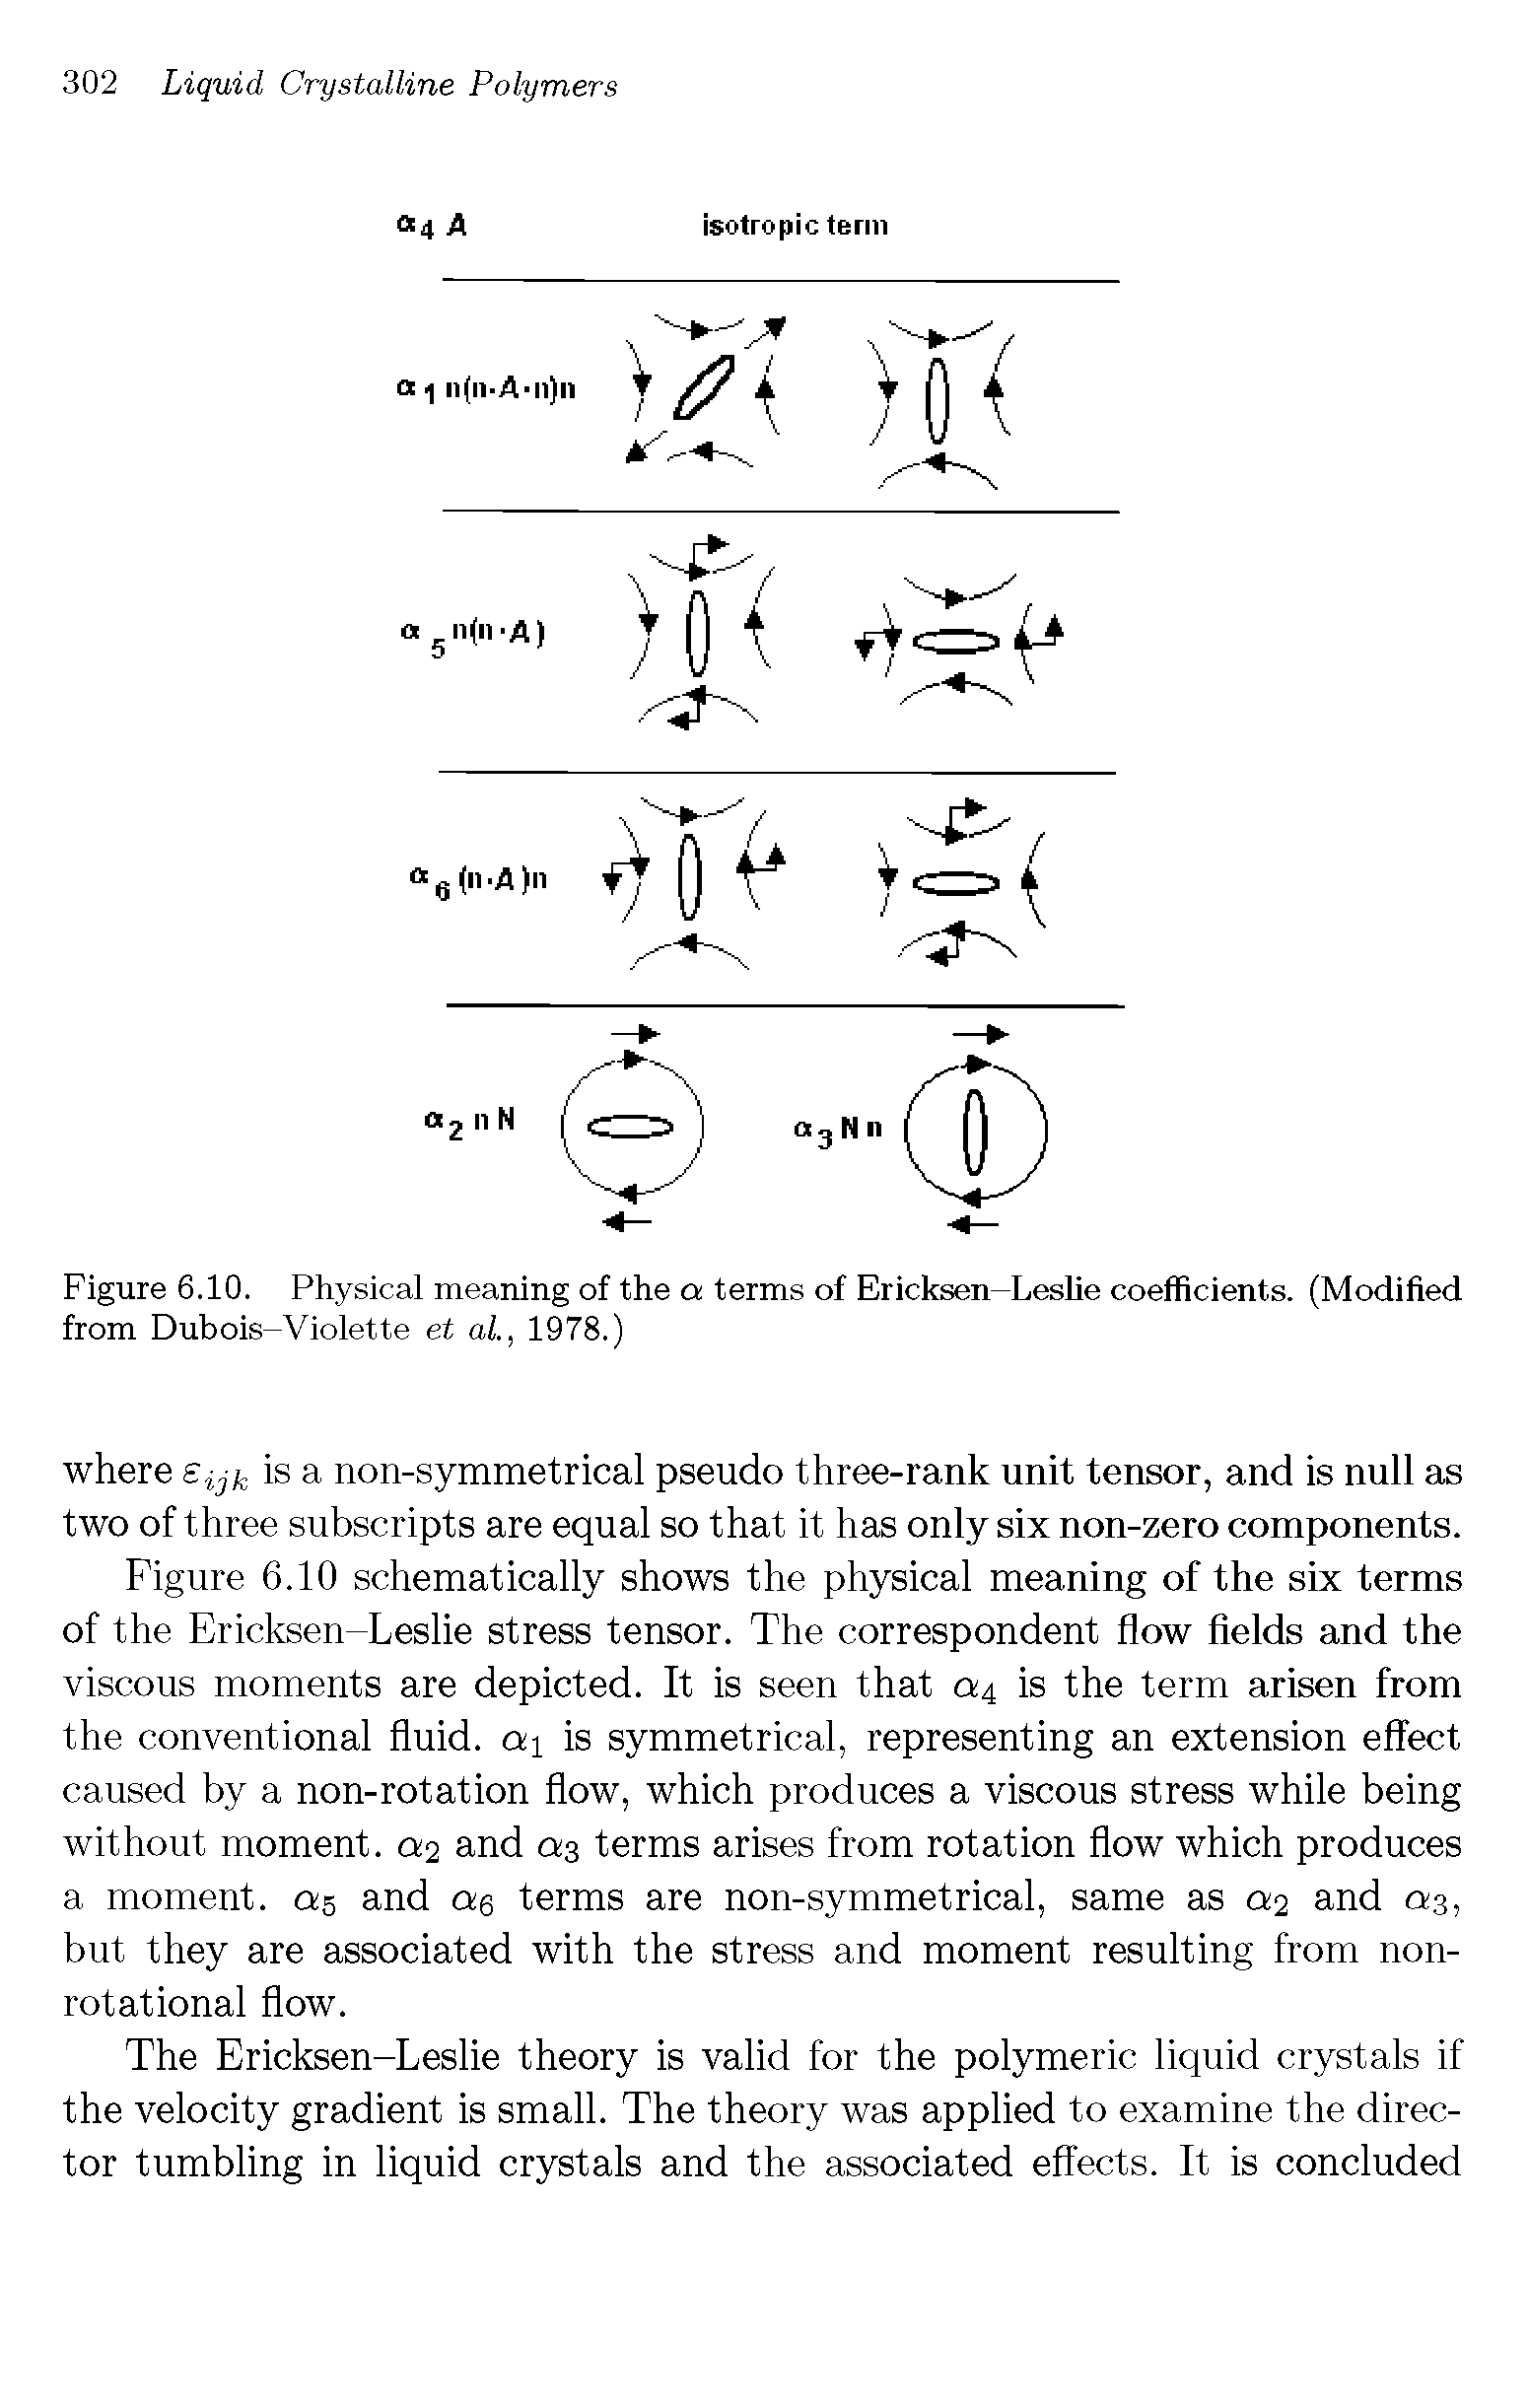 Figure 6.10. Physical meaning of the a terms of Ericksen-Leslie coefficients. (Modified from Dubois-Violette et al., 1978.)...